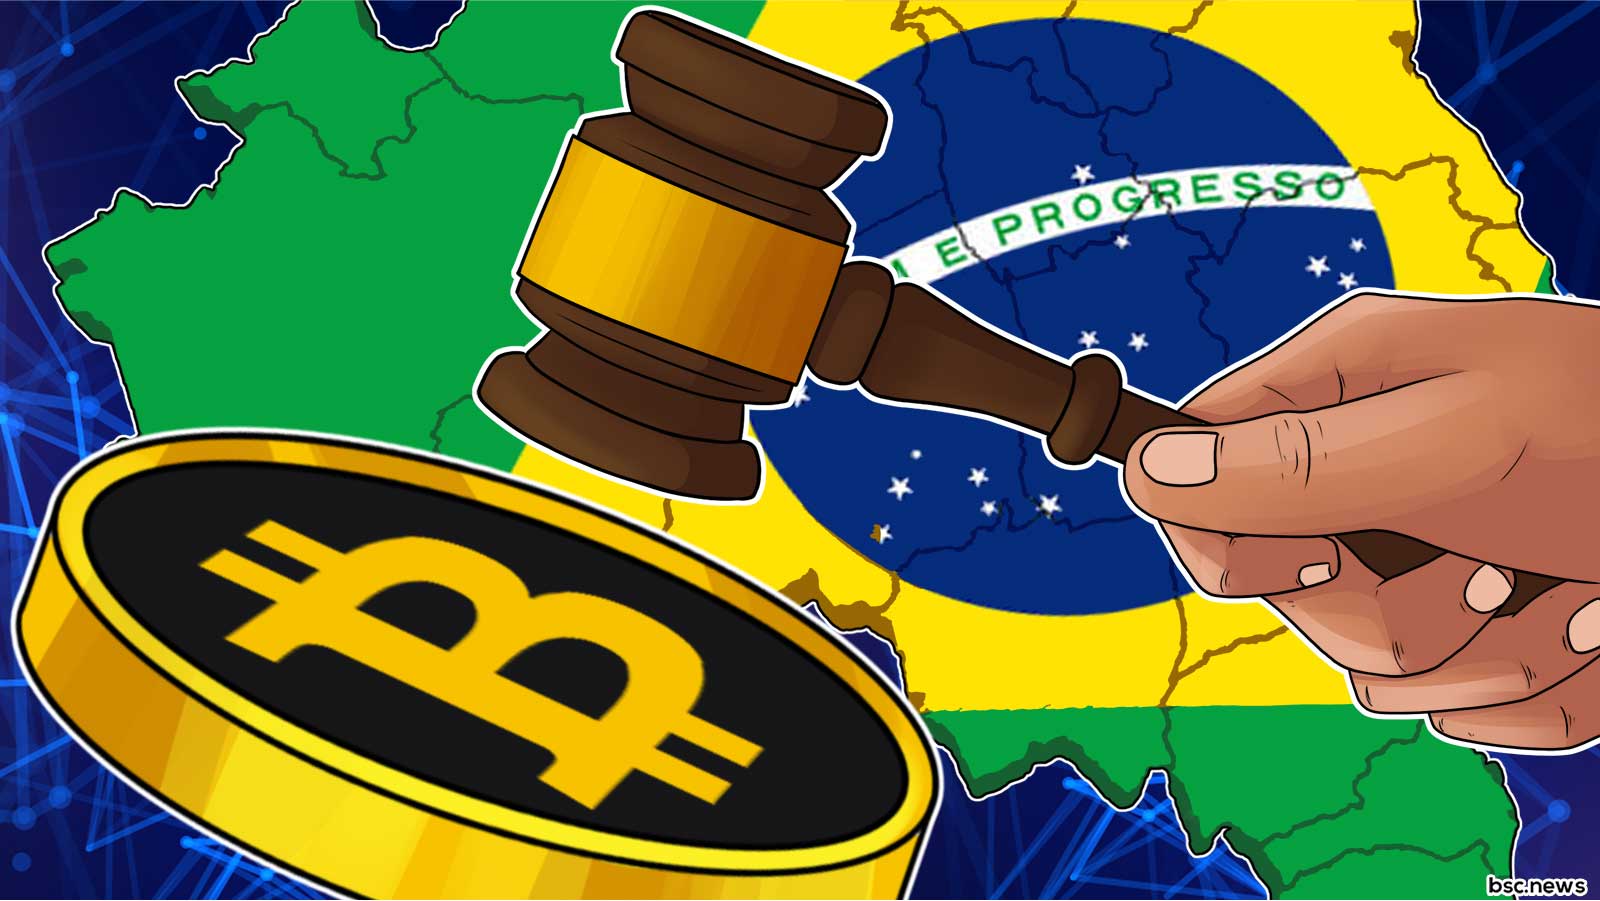 It’s a historic day for cryptocurrencies in Brazil, as the Senate has finally approved the country’s first bill aimed at regulating the crypto market